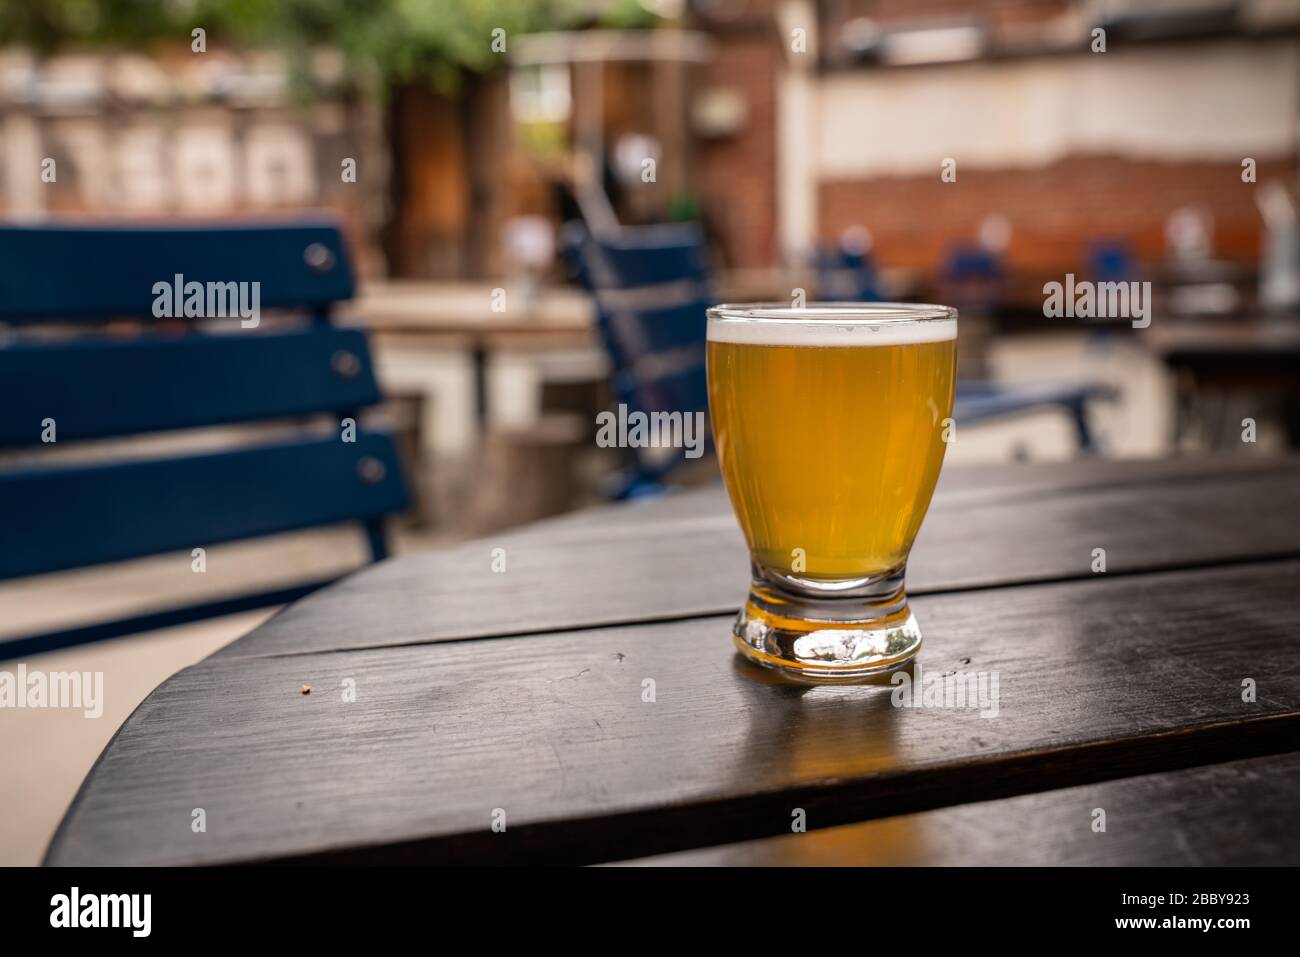 Golden beer in small tasting glass on table at outdoor restaurant Stock Photo